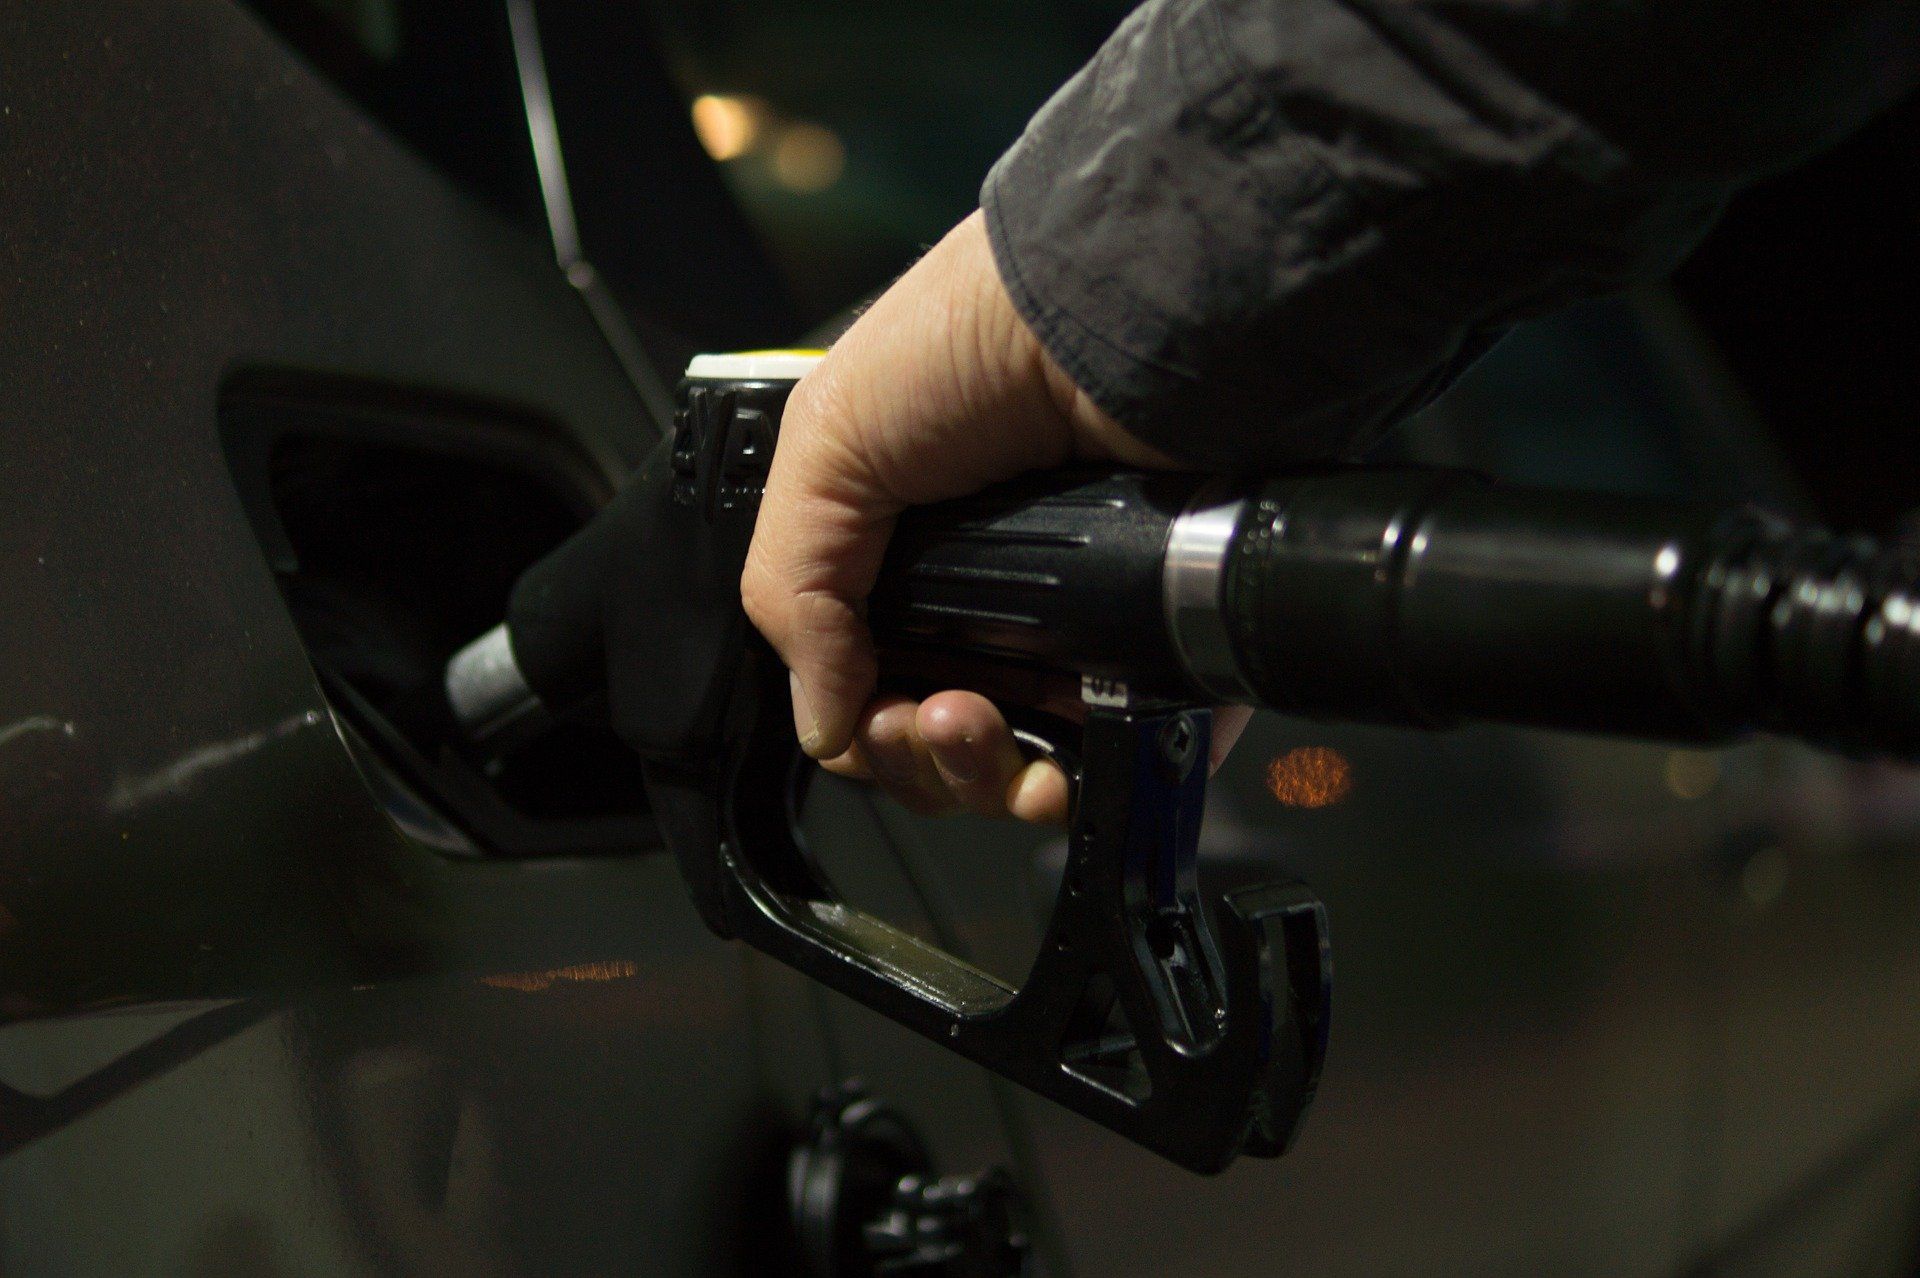 Fuel prices: Petrol priced at Rs 95.41, diesel Rs 86.67 in Delhi on January 31, 2022